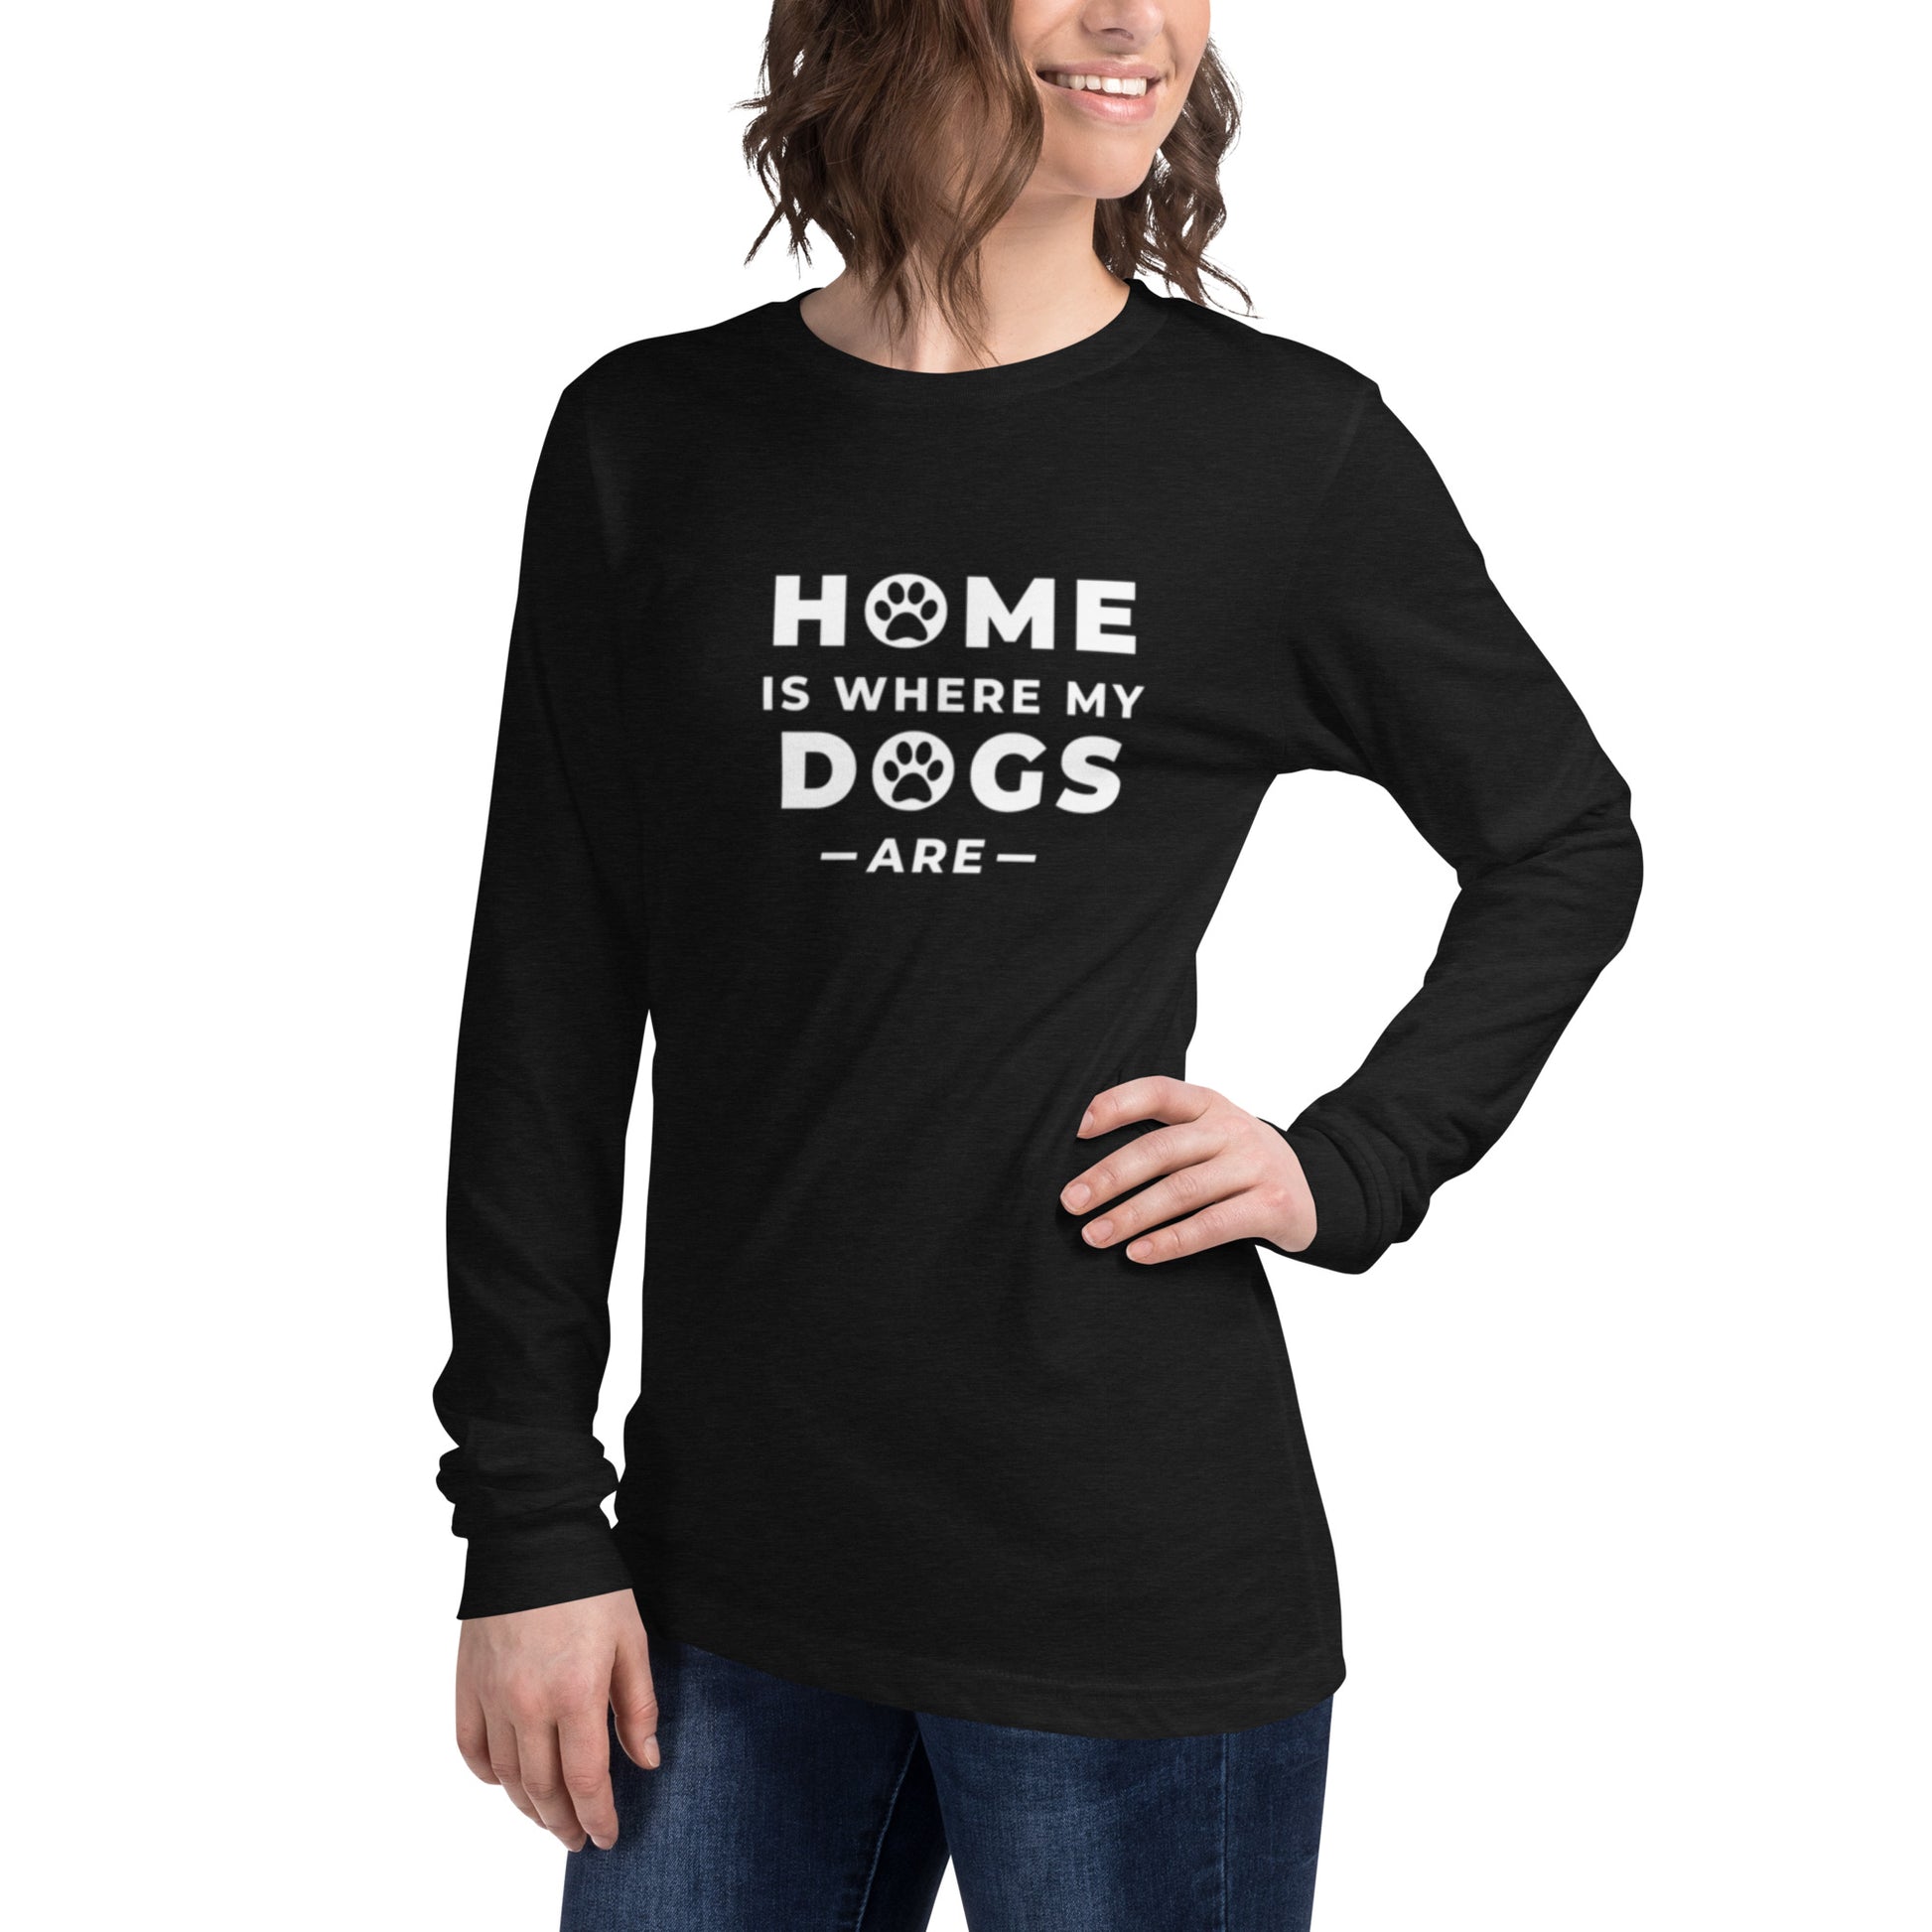 Long sleeve t-shirt with "Home is where my dogs are" printed on front